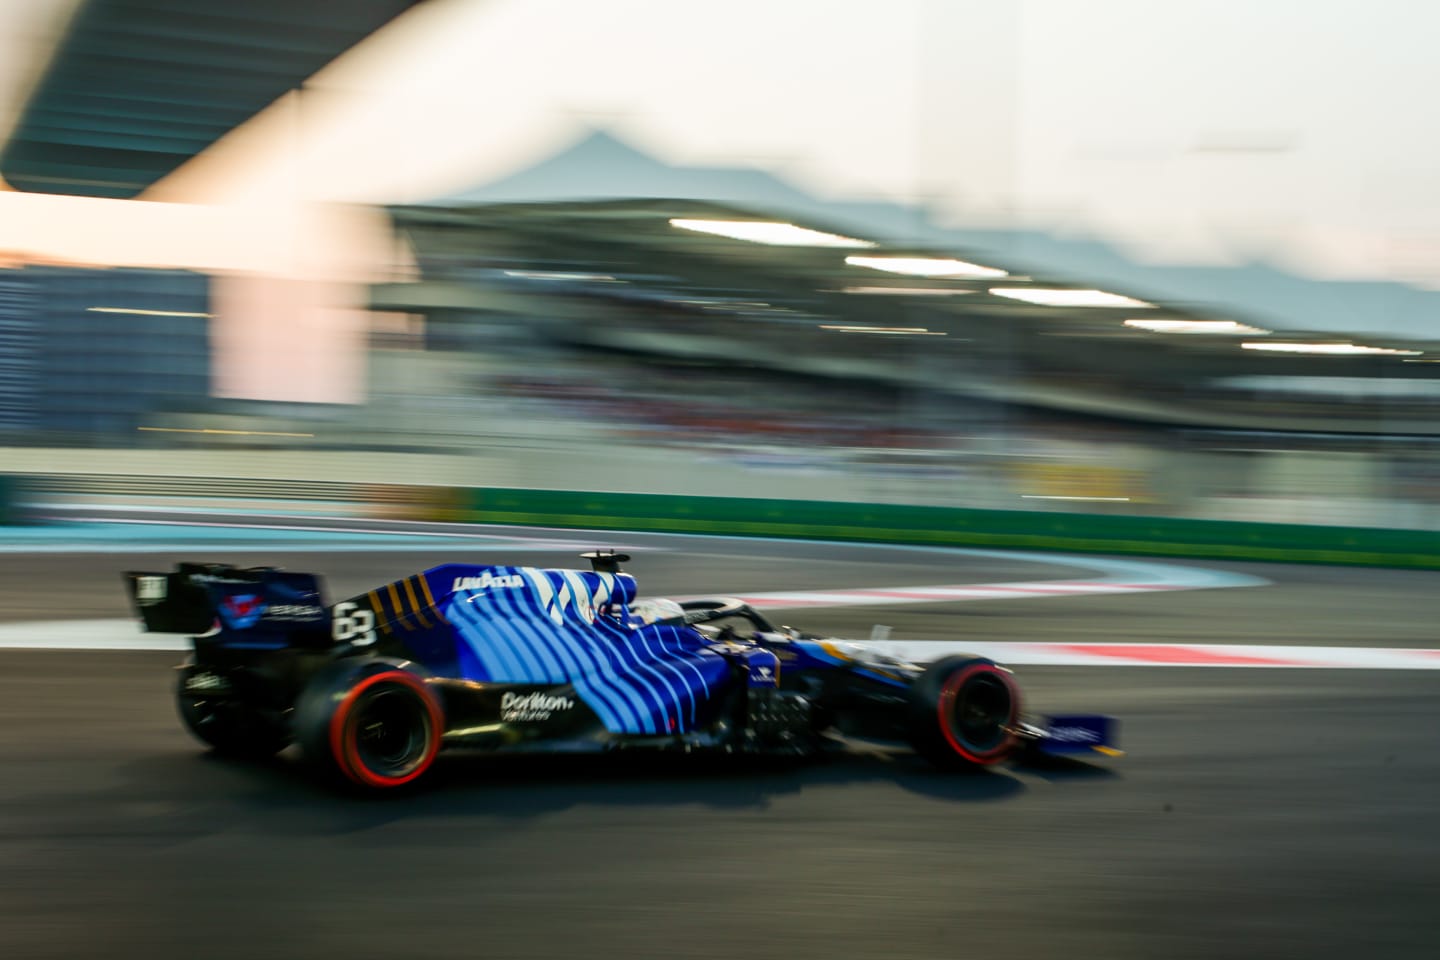 ABU DHABI, UNITED ARAB EMIRATES - DECEMBER 11: George Russell of Williams and Great Britain  during qualifying ahead of the F1 Grand Prix of Abu Dhabi at Yas Marina Circuit on December 11, 2021 in Abu Dhabi, United Arab Emirates. (Photo by Peter Fox/Getty Images)